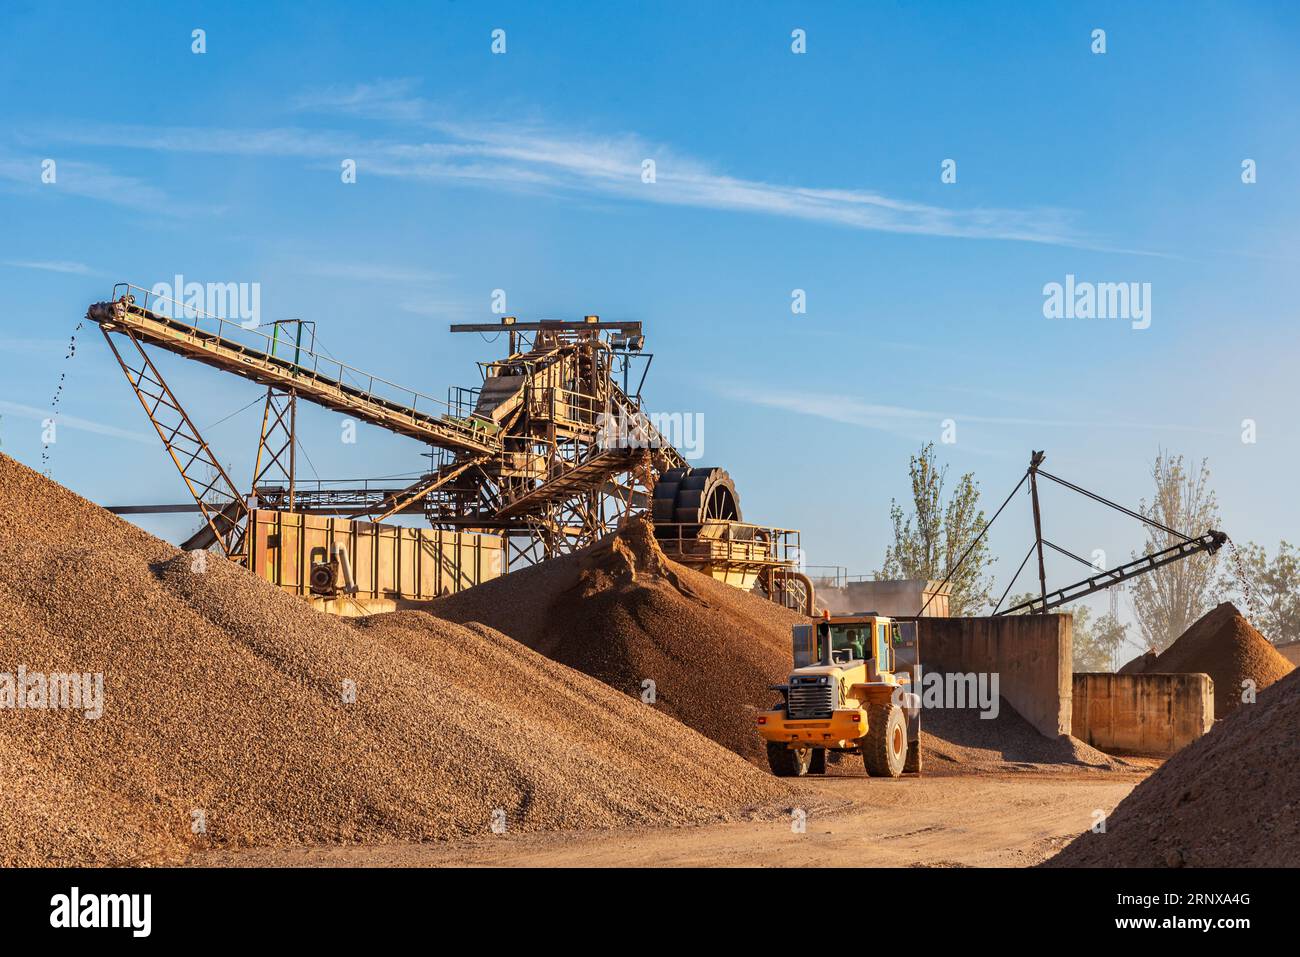 Machinery in a quarry with several conveyor belts to select the different sizes of gravel. Stock Photo